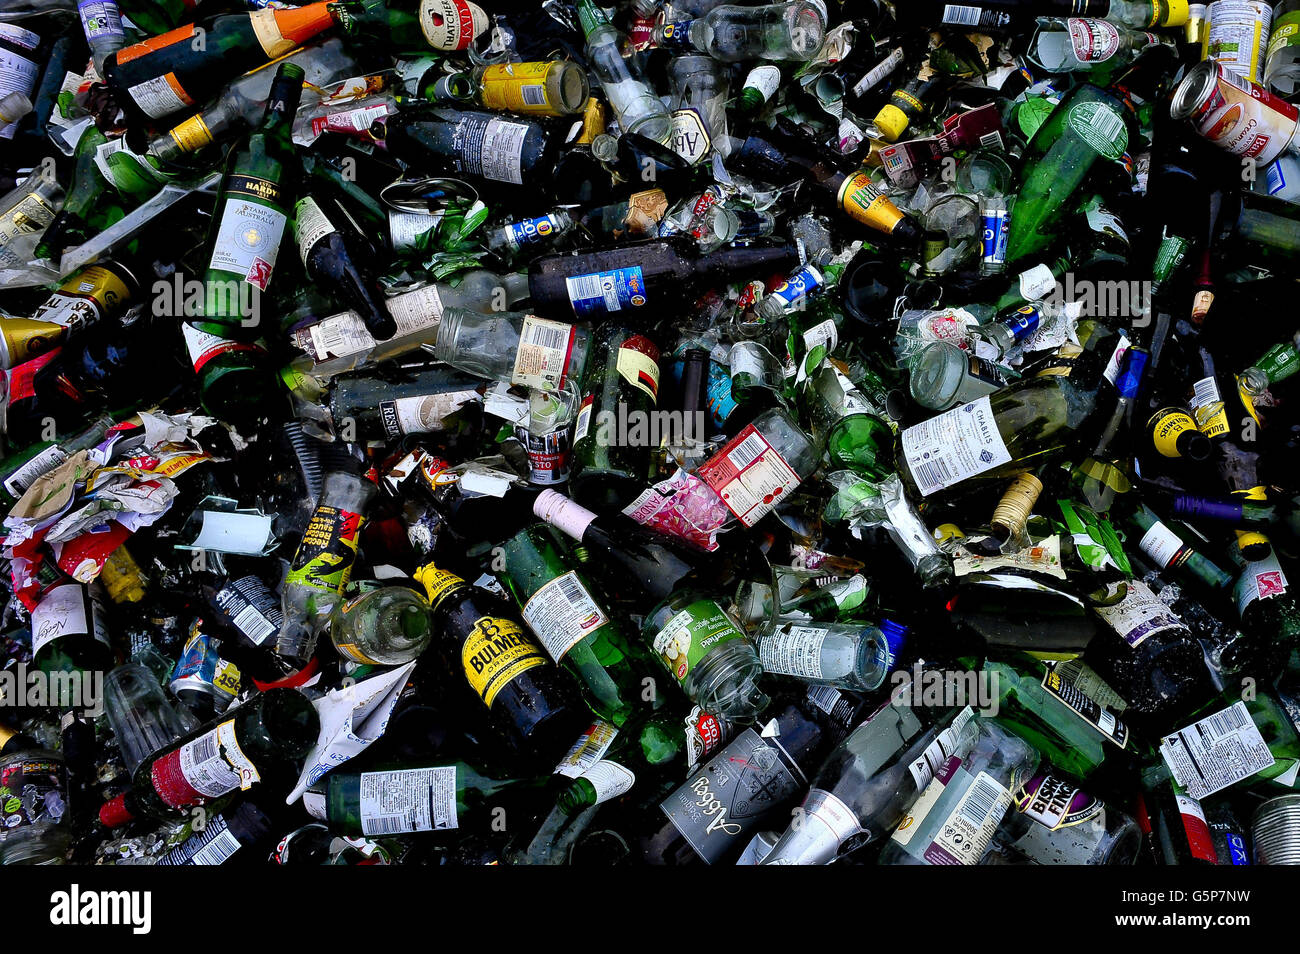 Thousands of glass bottles and jars that are to be recycled at the Eastville depot in Bristol after the festive period. Stock Photo